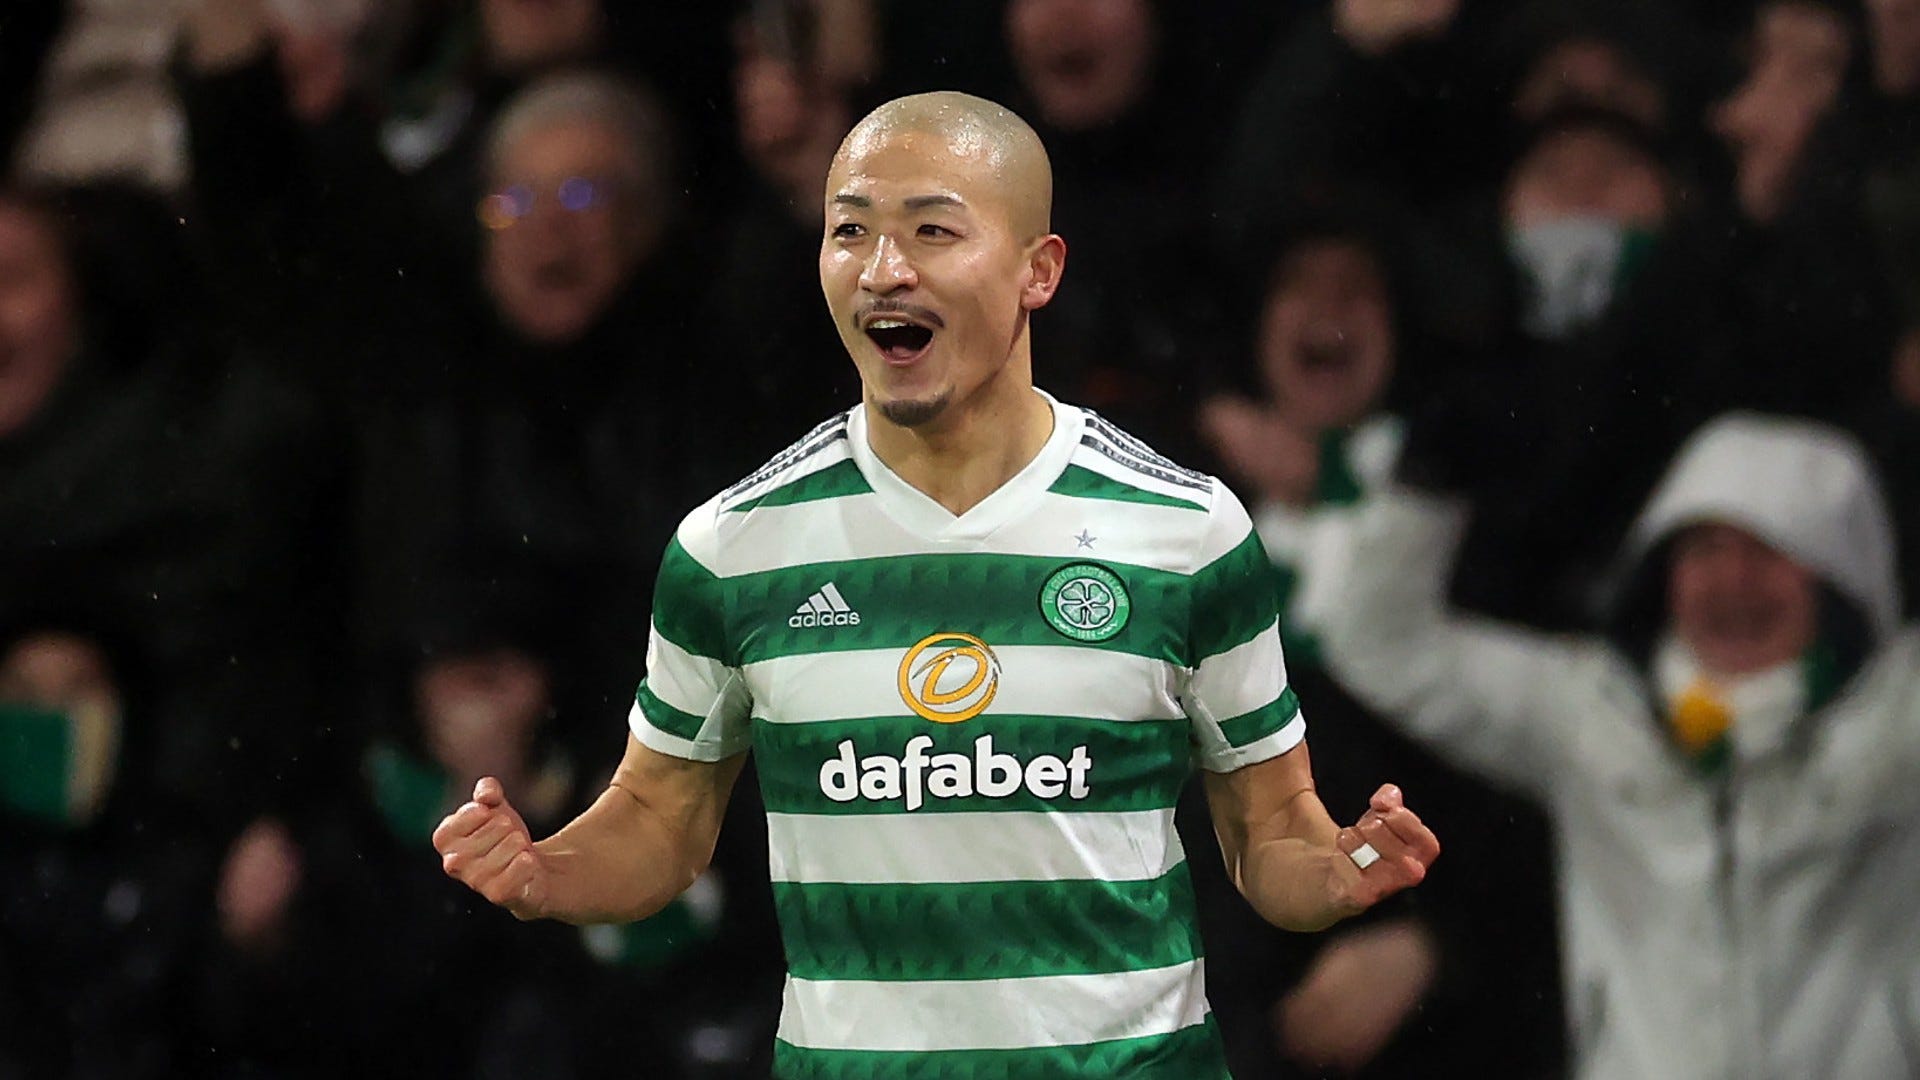 Celtic vs Wolves Live stream, TV channel, kick-off time and where to watch Goal US